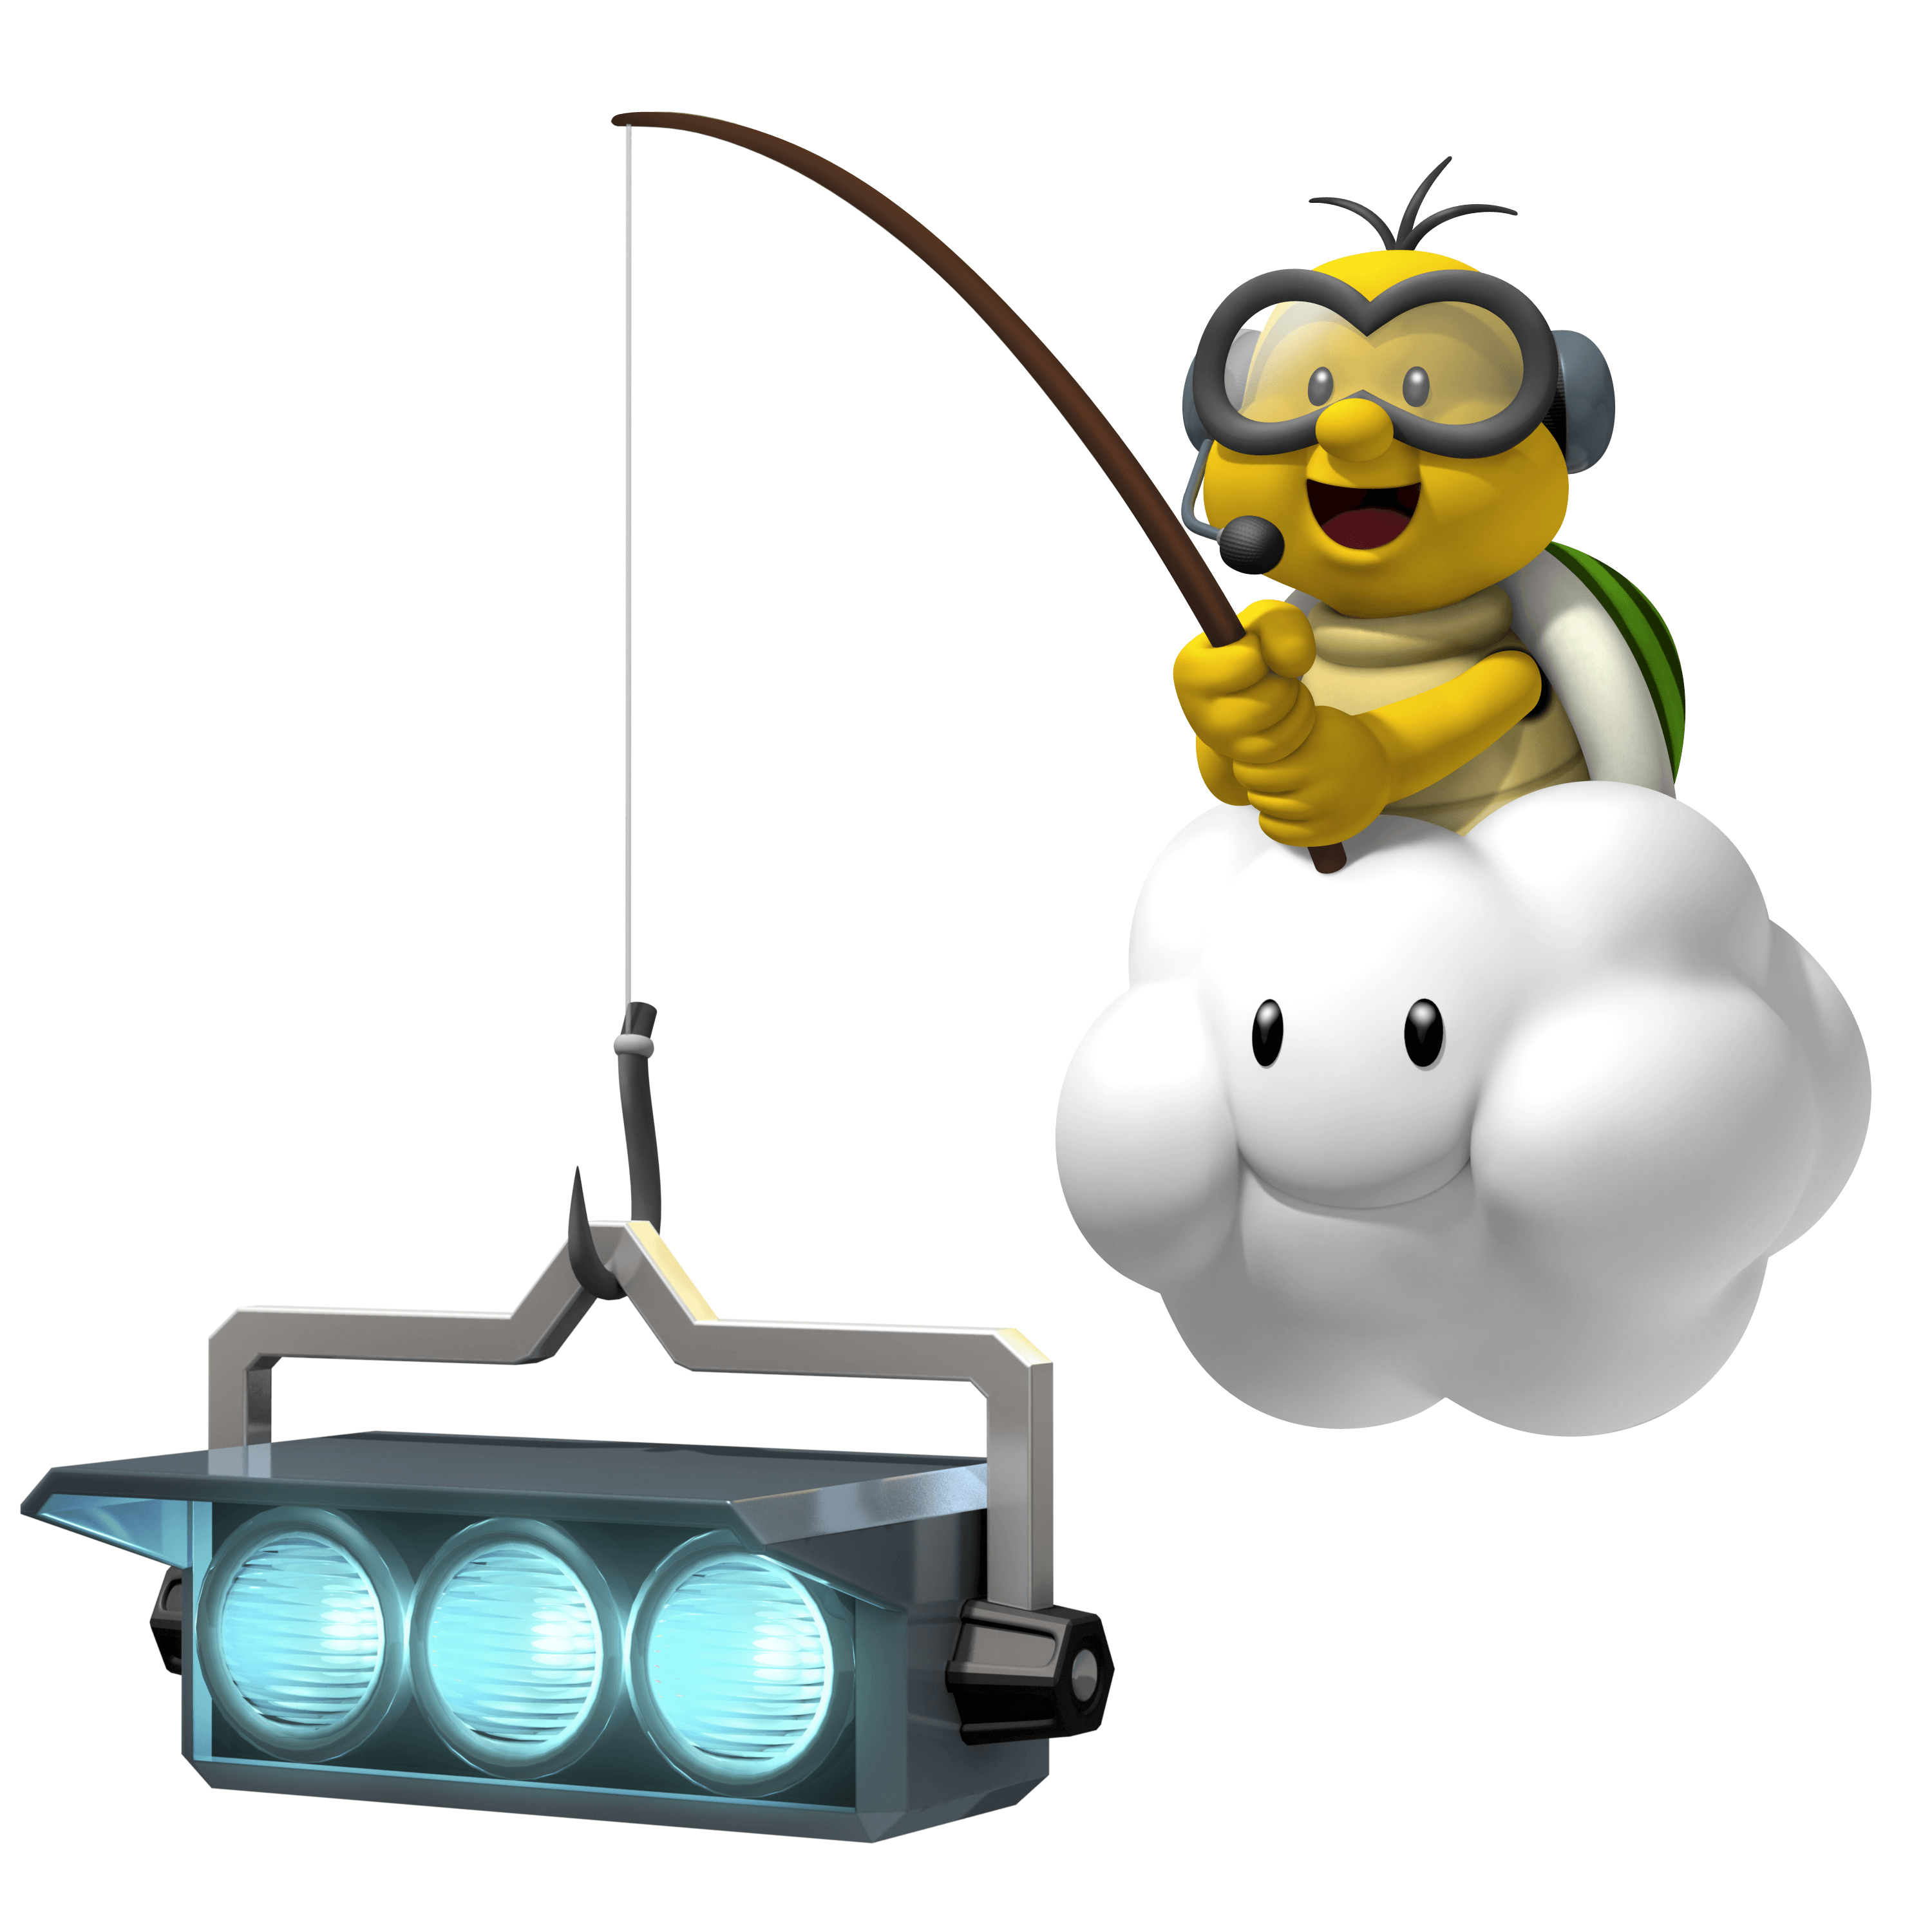 Lakitu, the race official with his signature traffic lights. 